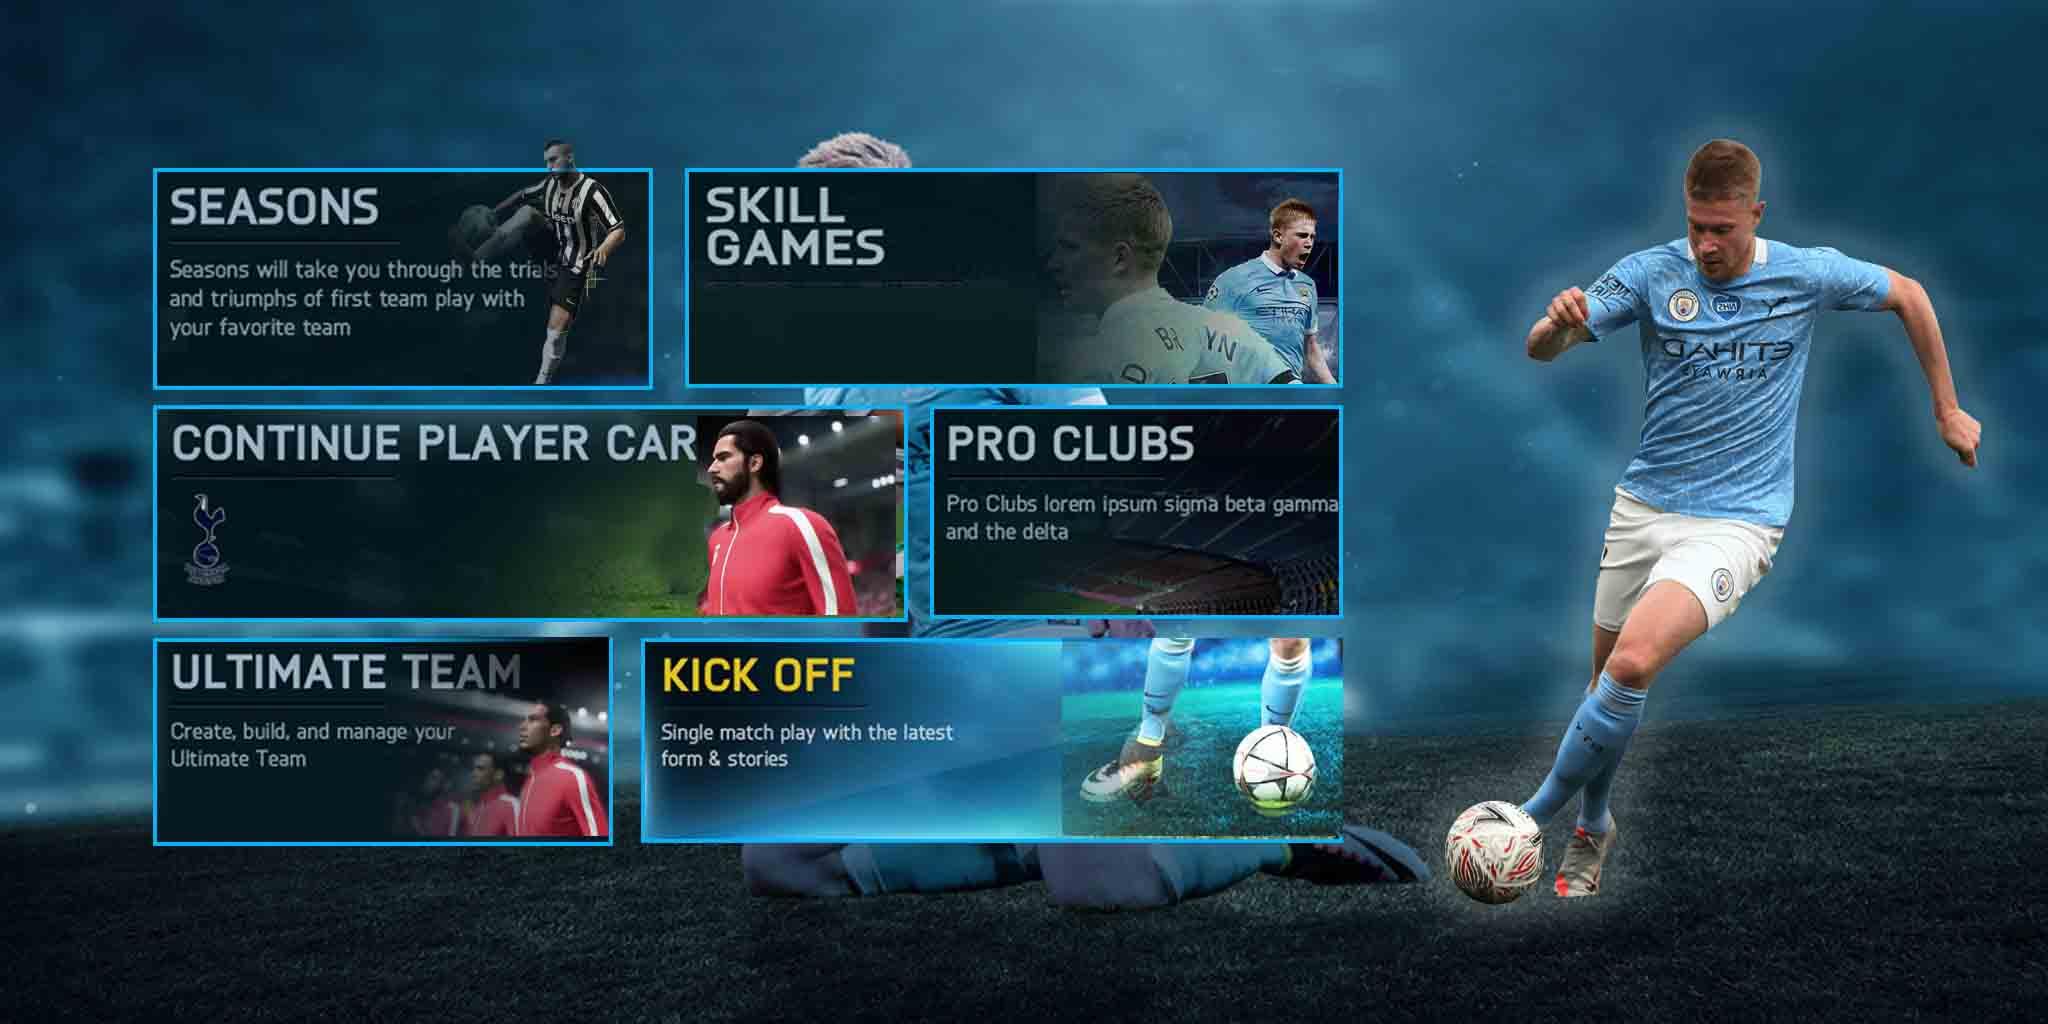 Download FIFA MOBILE on PC with MEmu